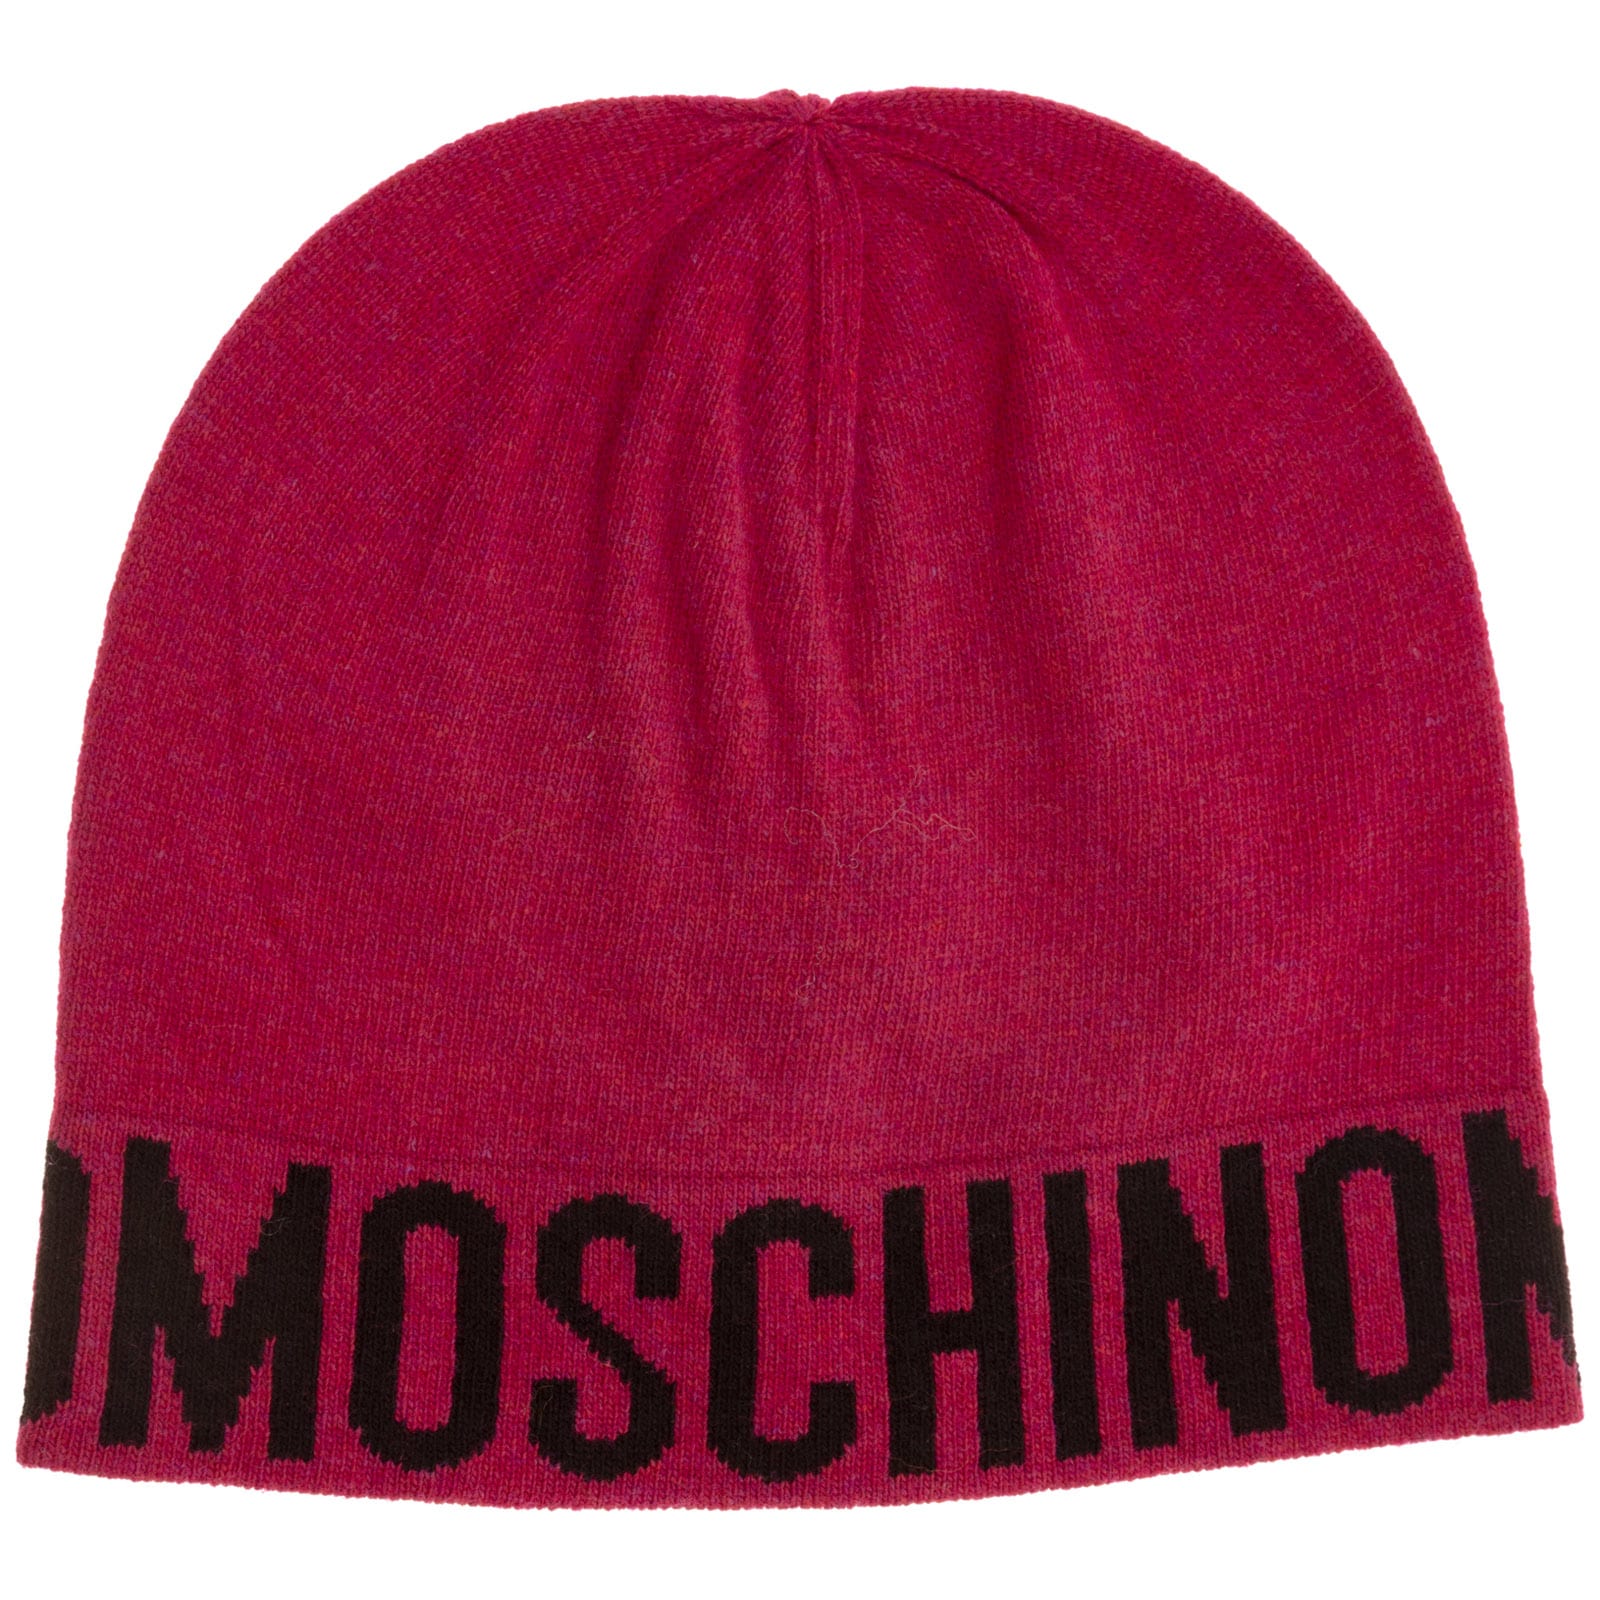 MOSCHINO DOUBLE QUESTION MARK BEANIE,M235465233009